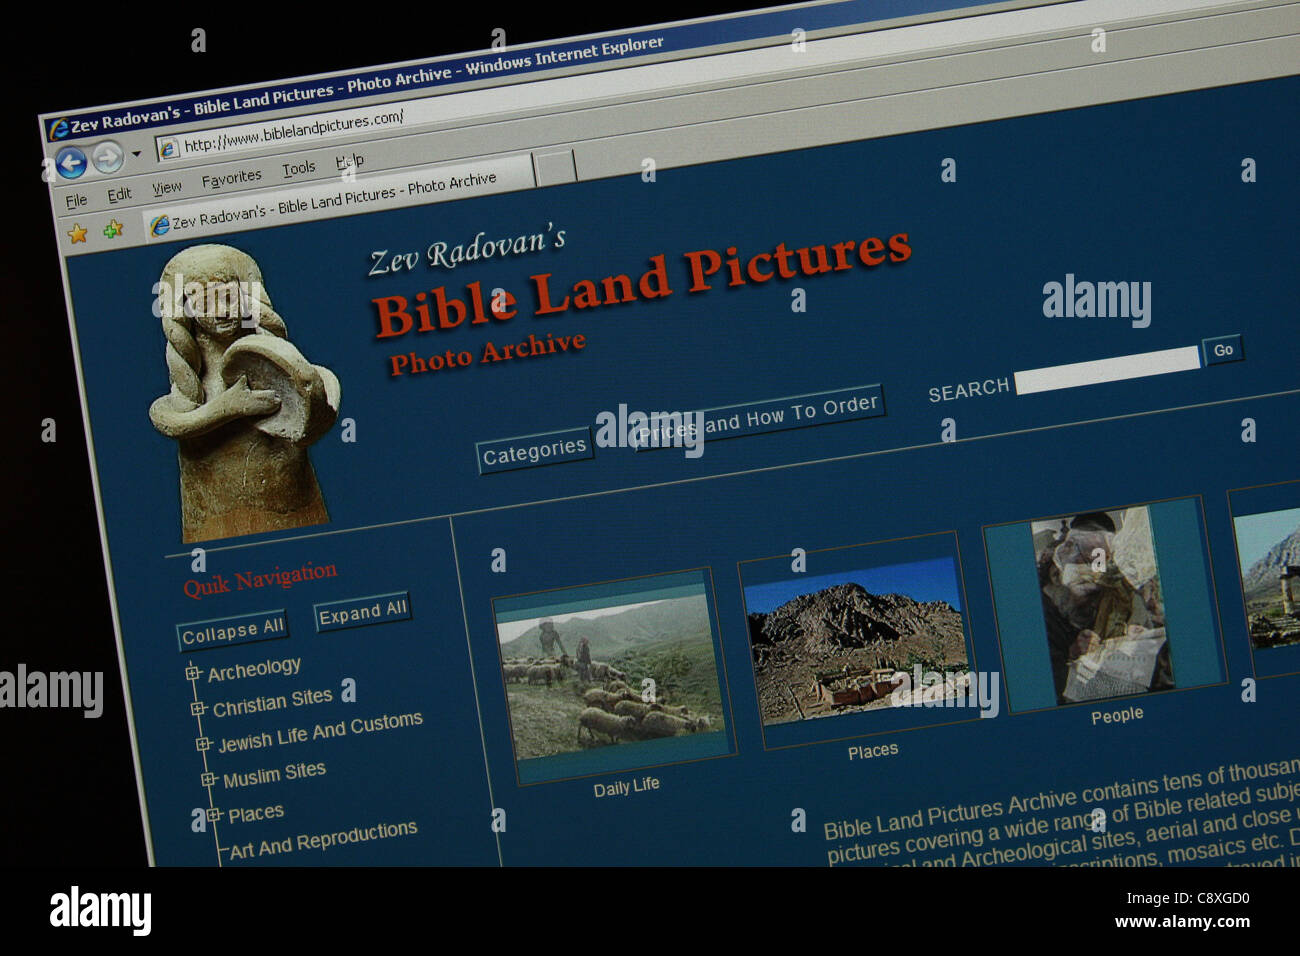 bible land pictures Stock Photo